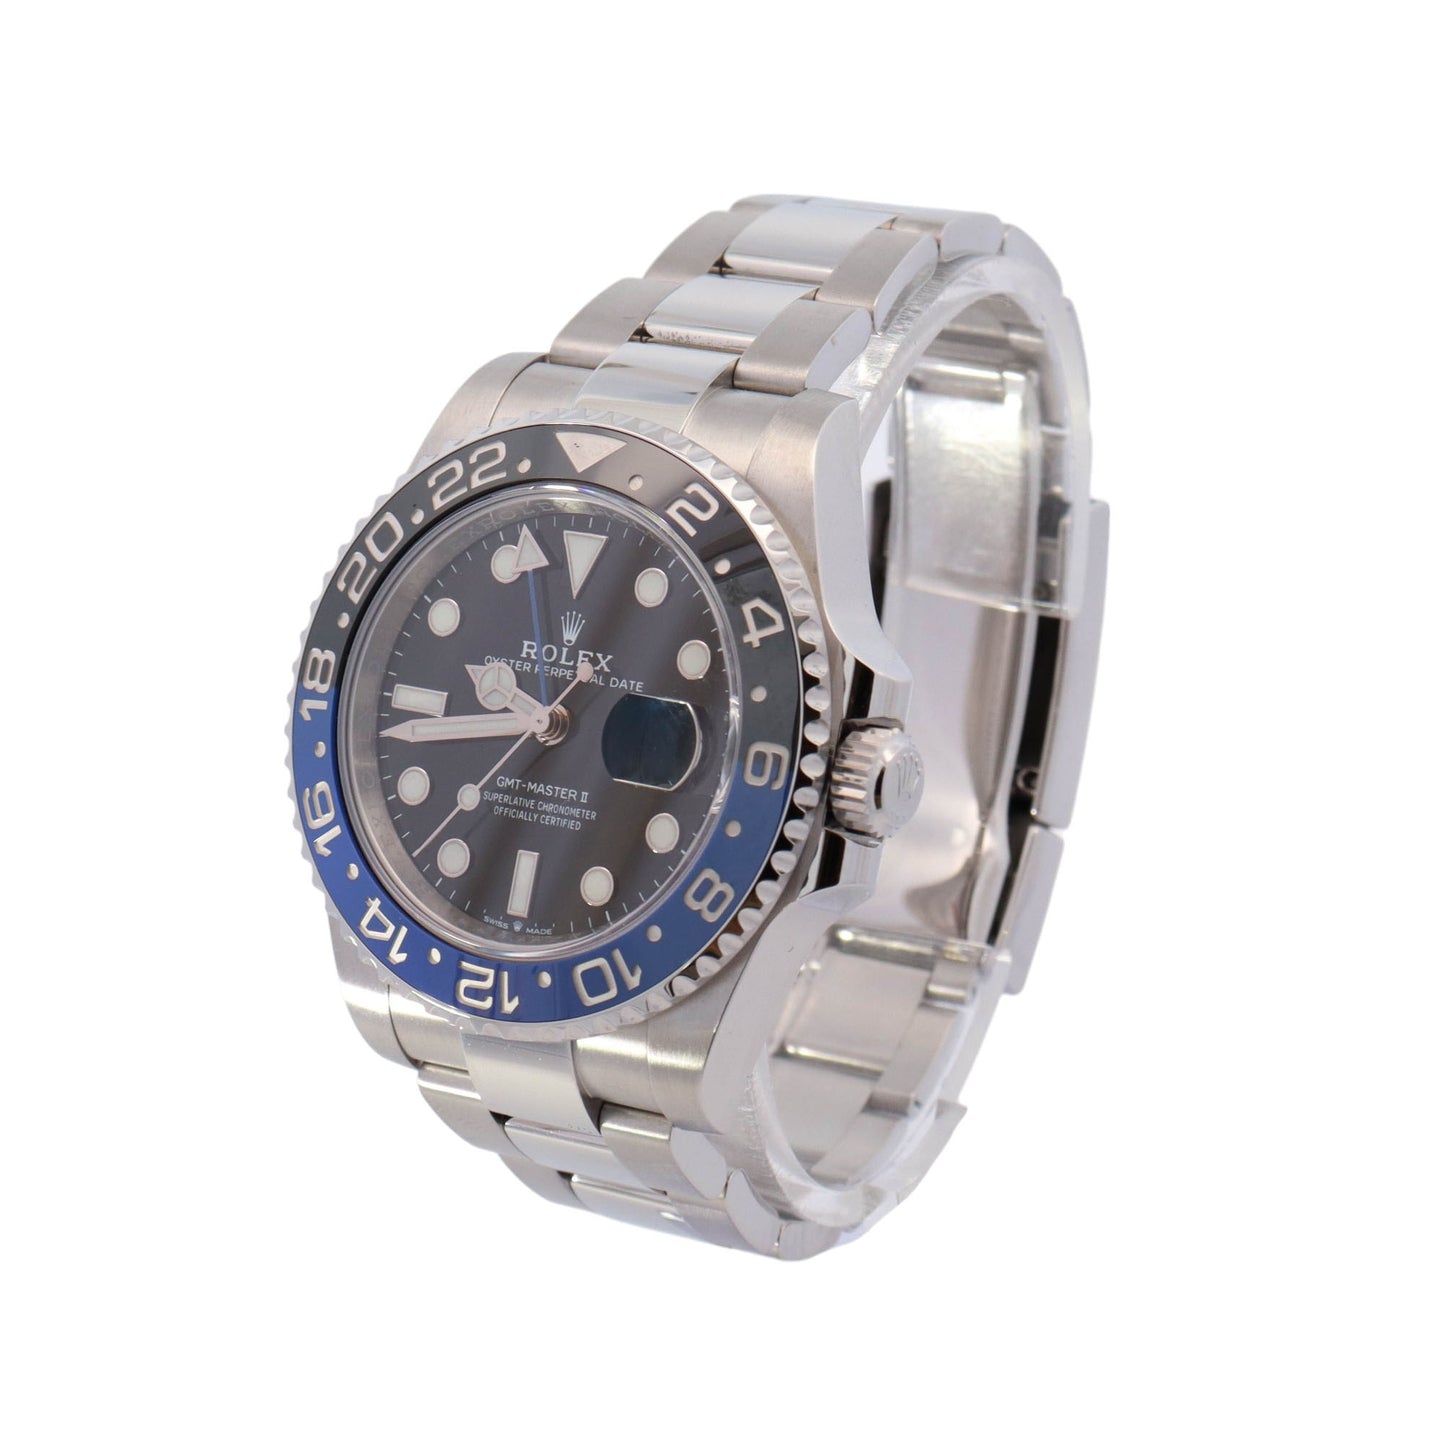 Rolex GMT Master II "Batman" Stainless Steel 40mm Black Dot Dial Watch Reference #: 126710BLNR